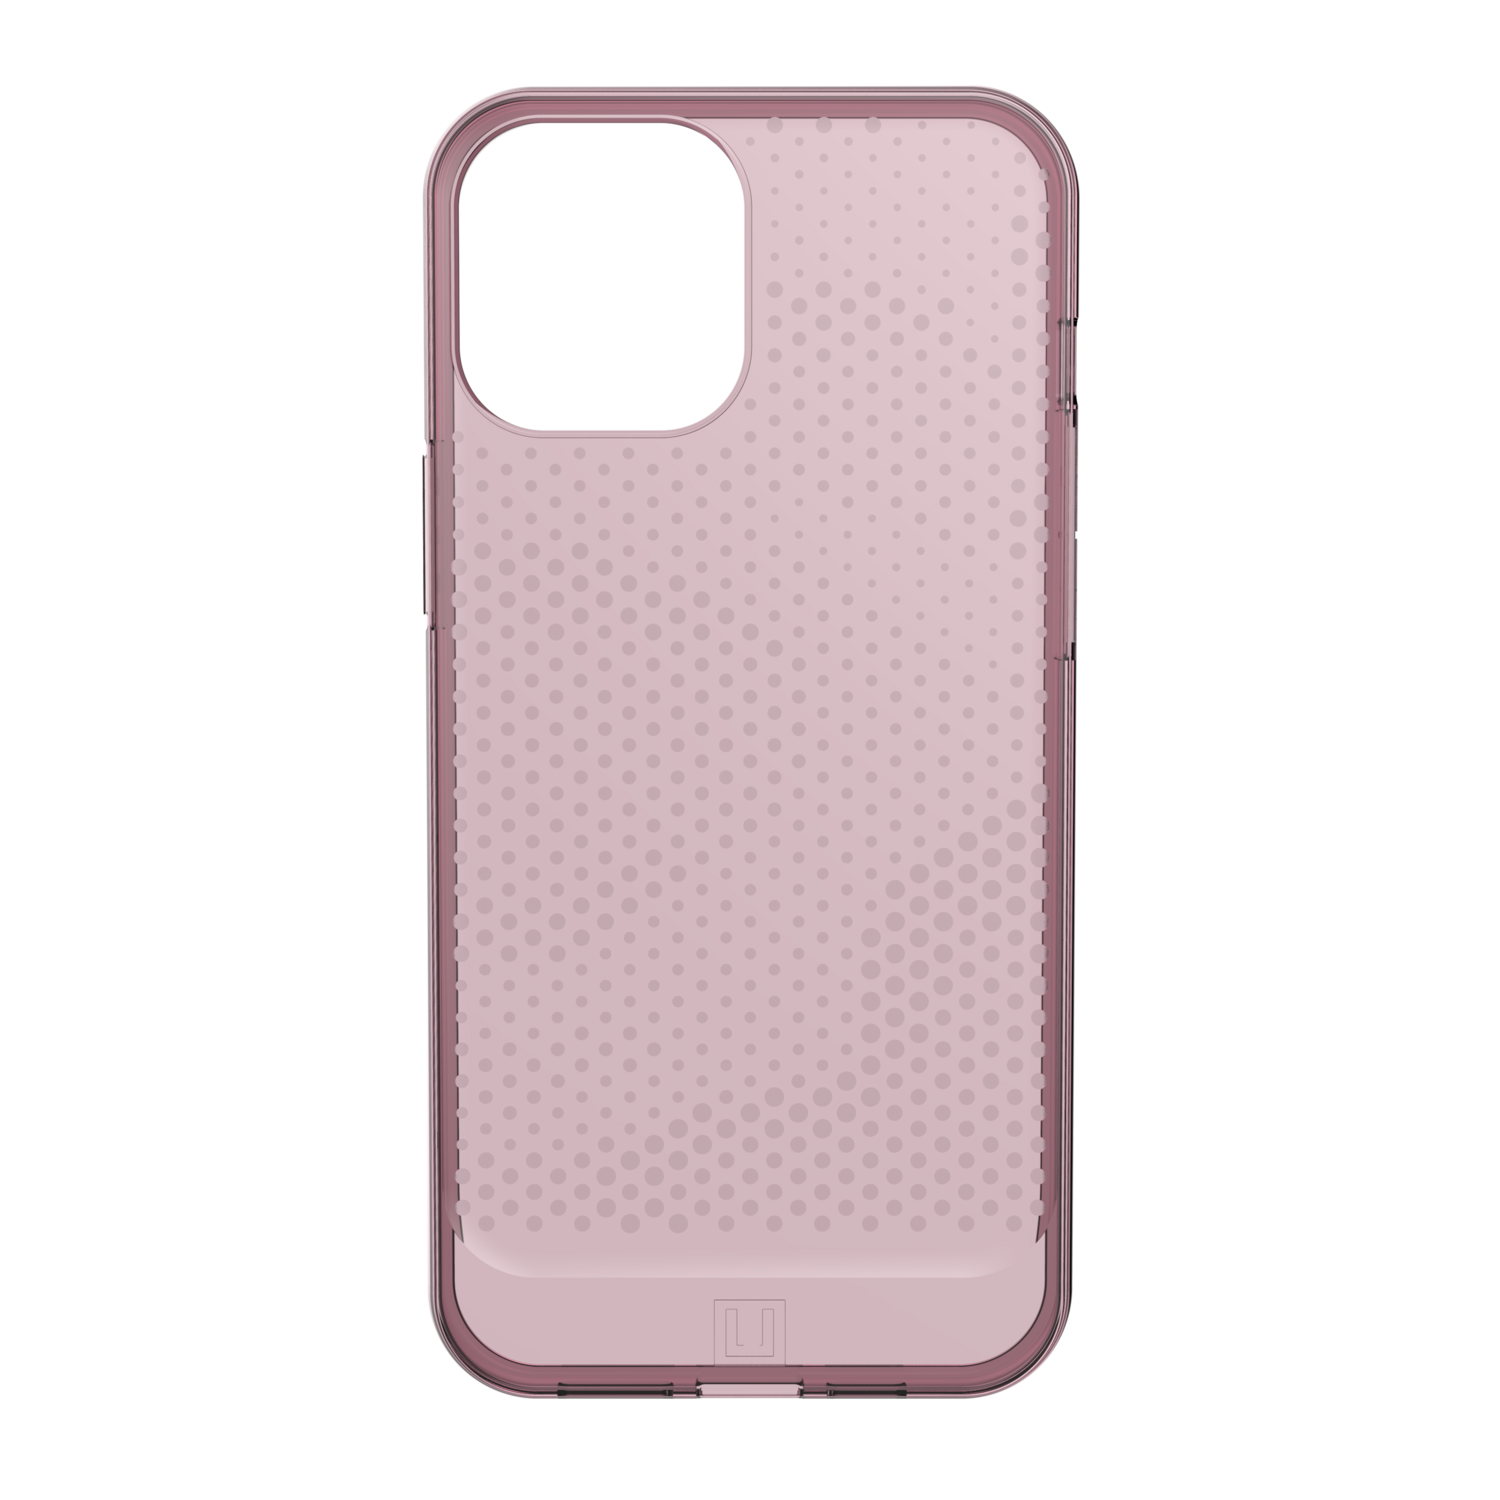 U by UAG iPhone 12 Pro Max 6.7" Lucent Case, Dusty Rose